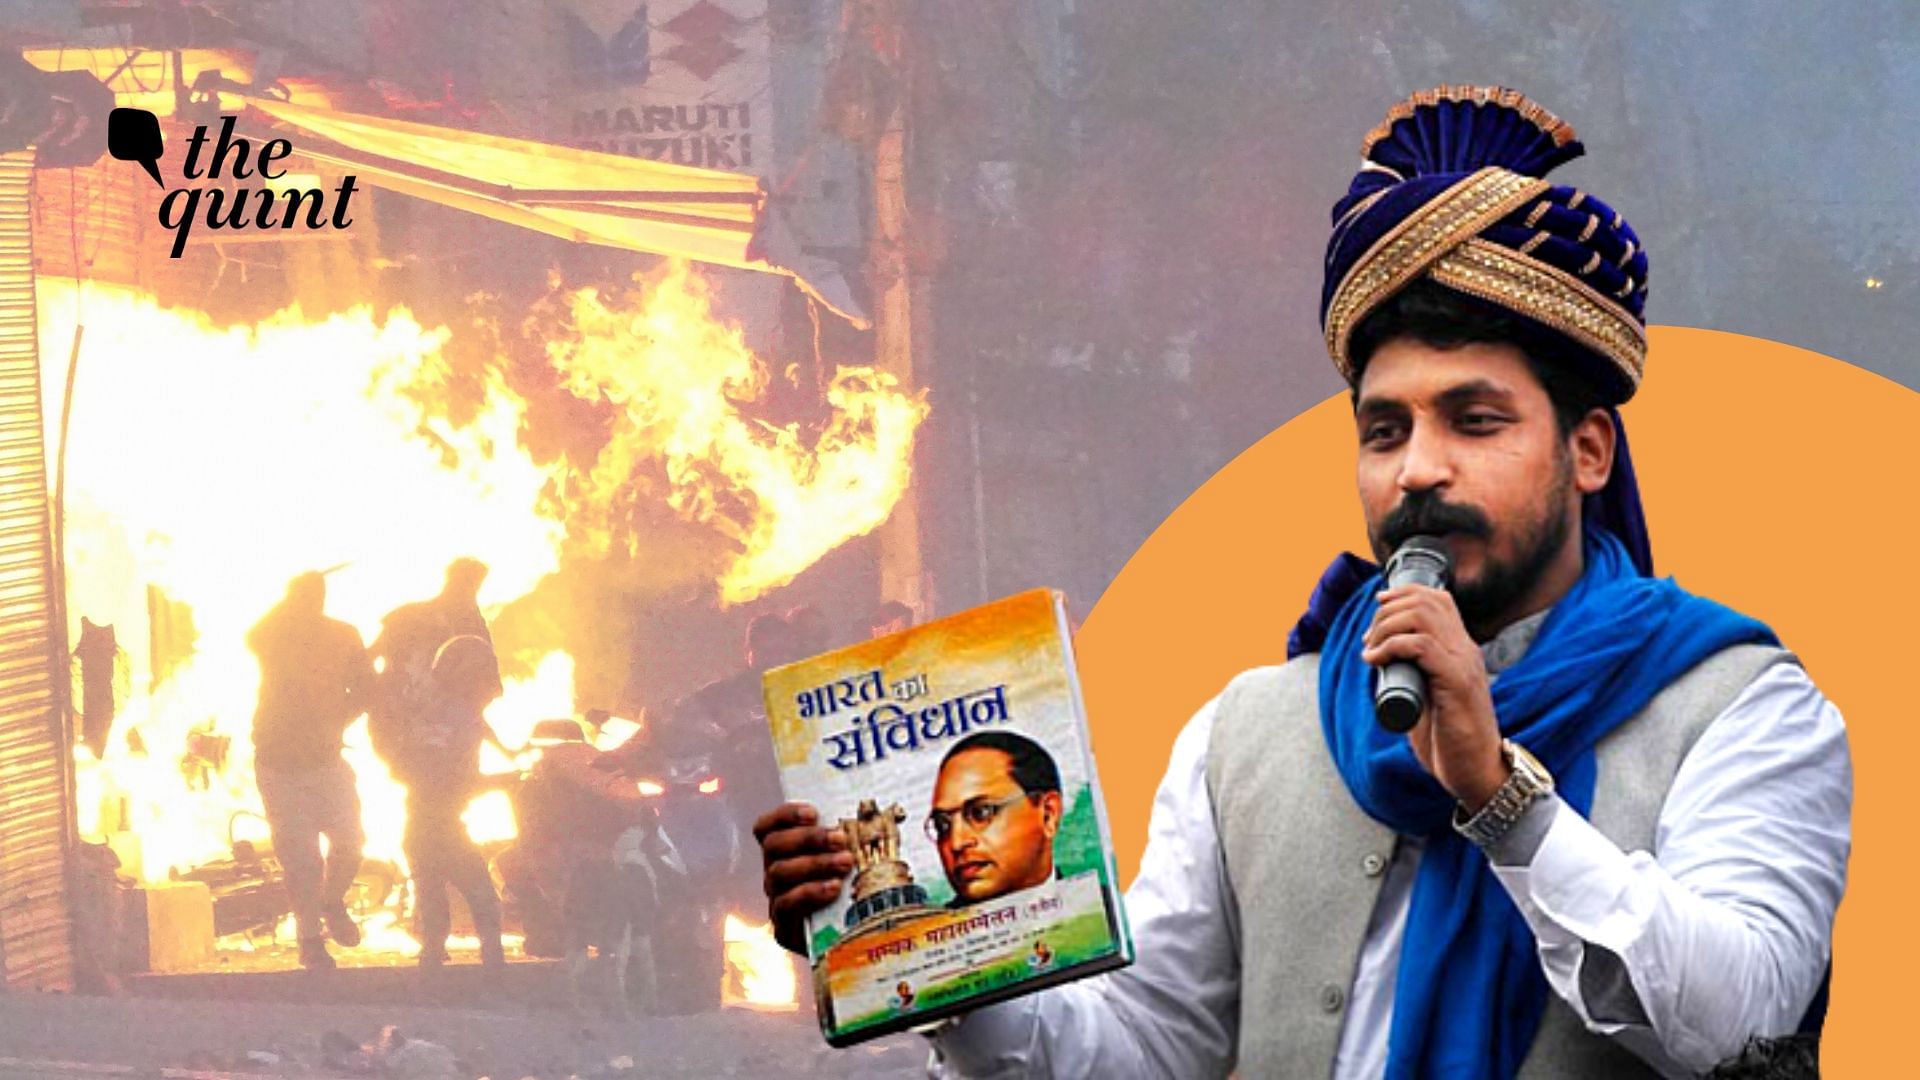 Bhim Army chief Chandrashekhar Azad’s name has been mentioned in one of the Delhi riots charge sheets